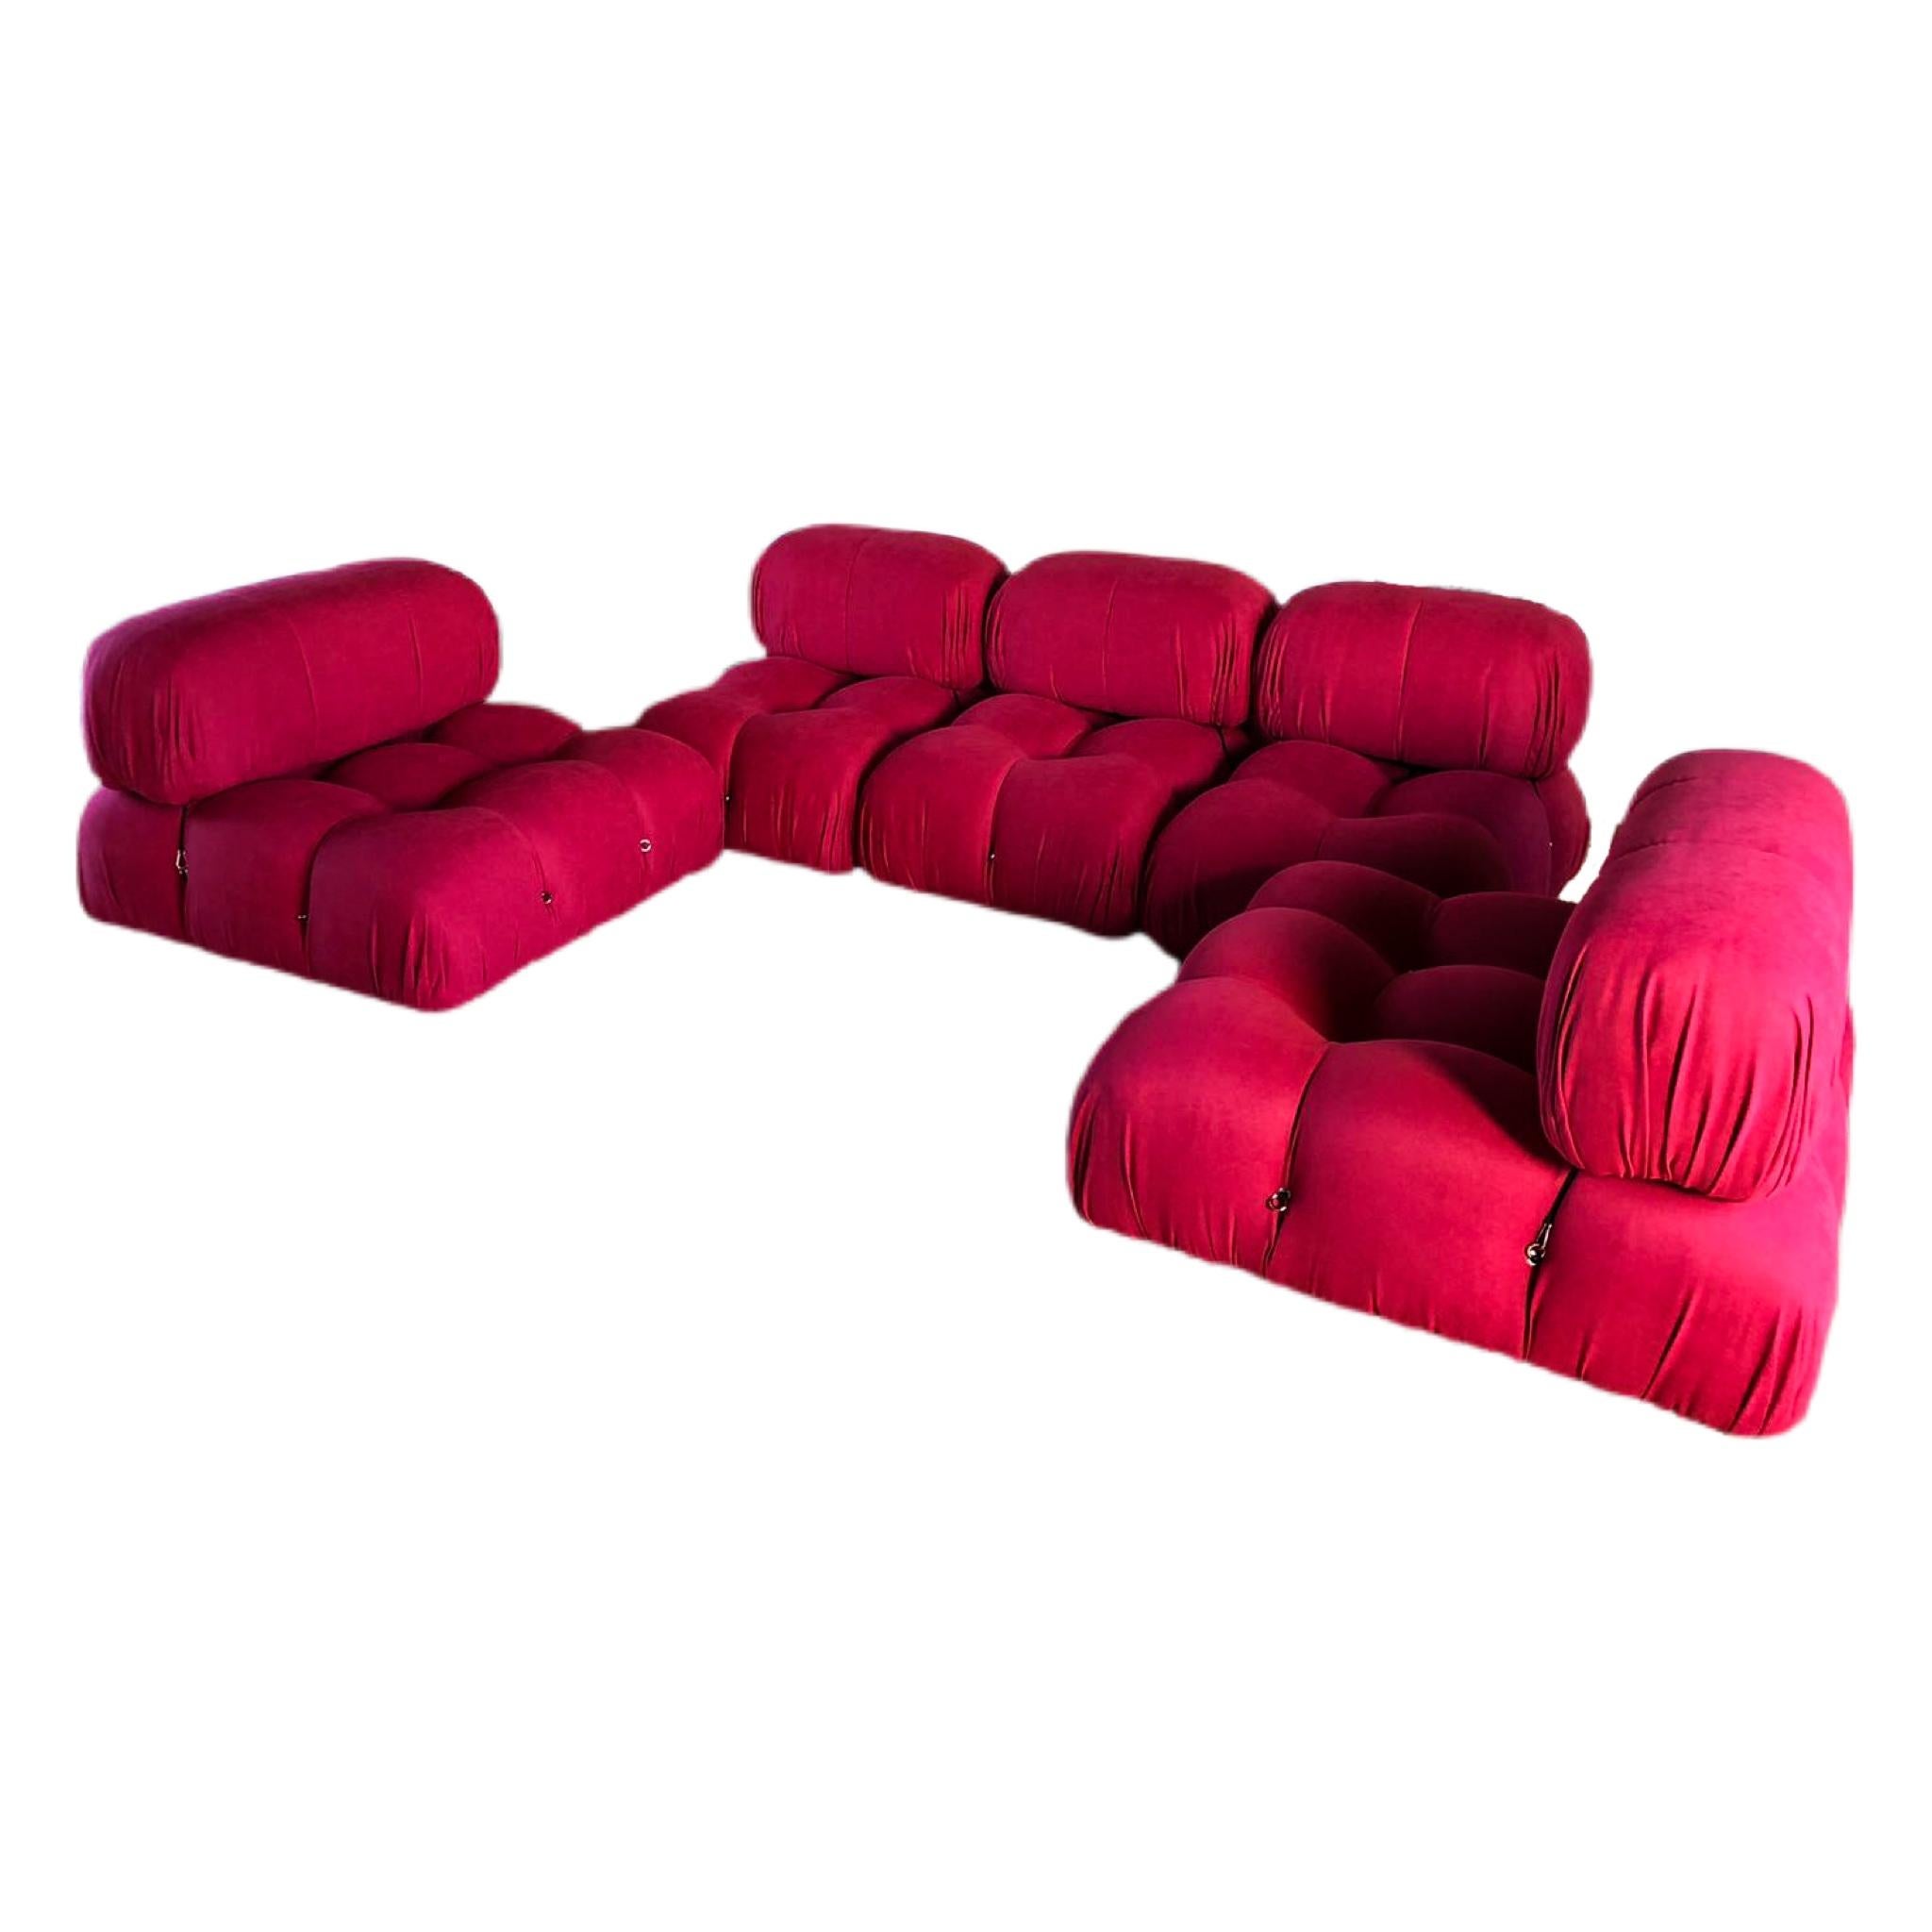 “Camaleonda” sofa, in red cotton upholstery, designed by Mario Bellini and manufactured by B&B Italia in 1972.

Fully restored and reupholstered in Italy.

The sofa is very comfortable, and the fact this wonderful piece is modular provides